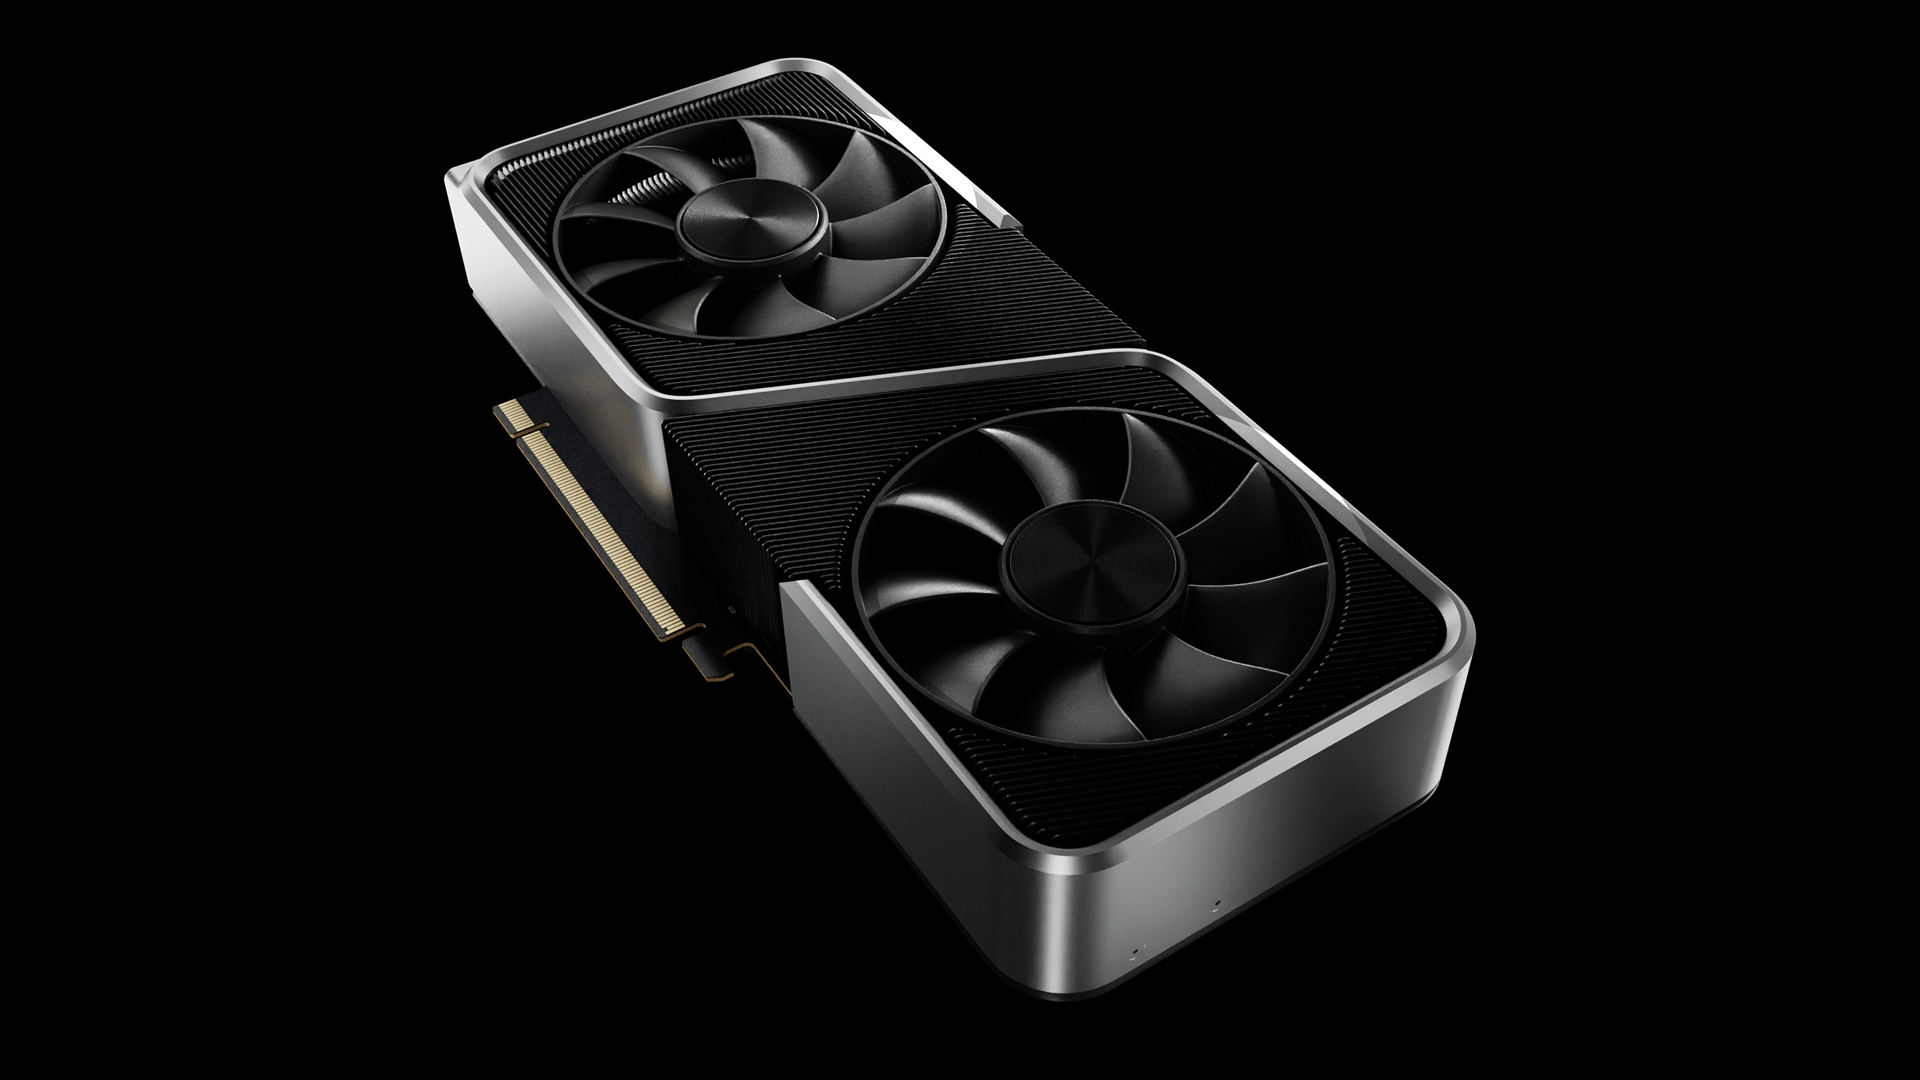 NVIDIA Launches GeForce RTX 3060 Ti – Price, Specs, & Release Date